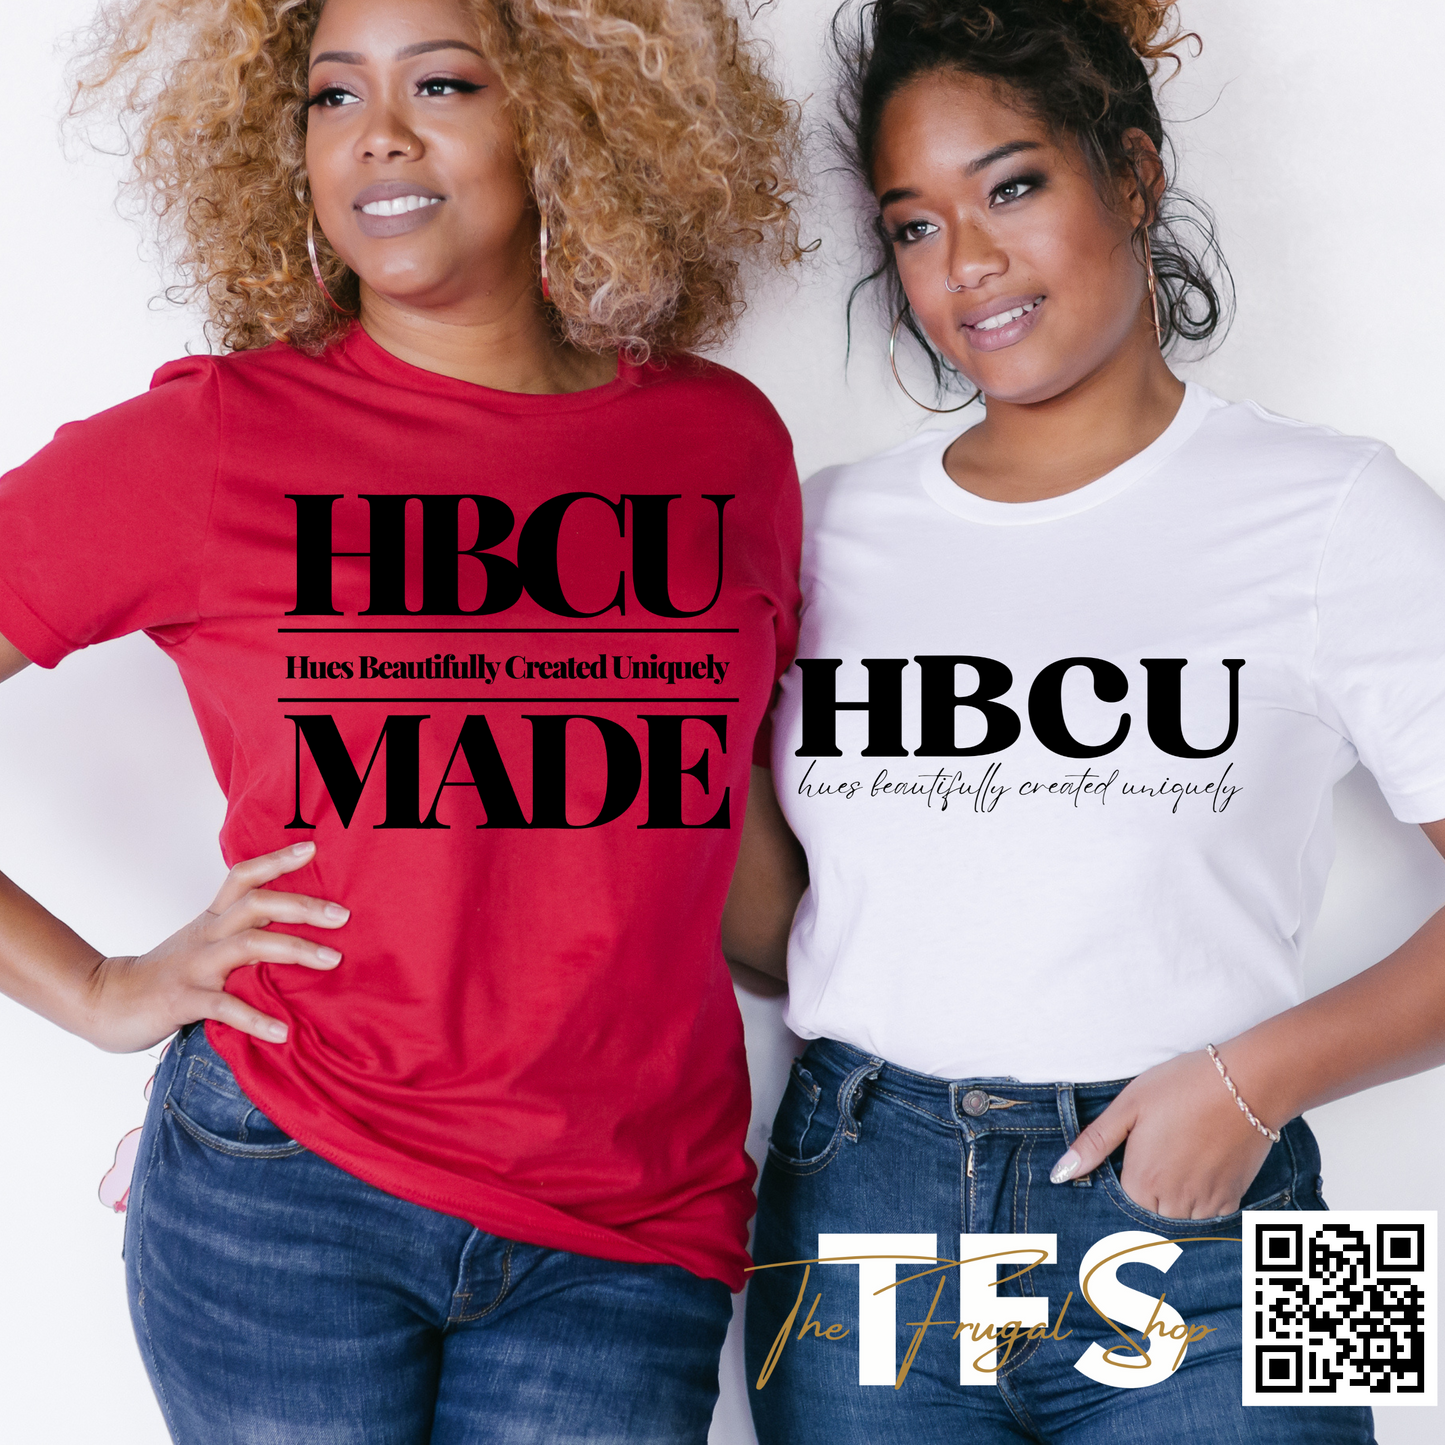 HBCU Hues Beautifully Created Uniquely Made Unisex Jersey T-Shirt